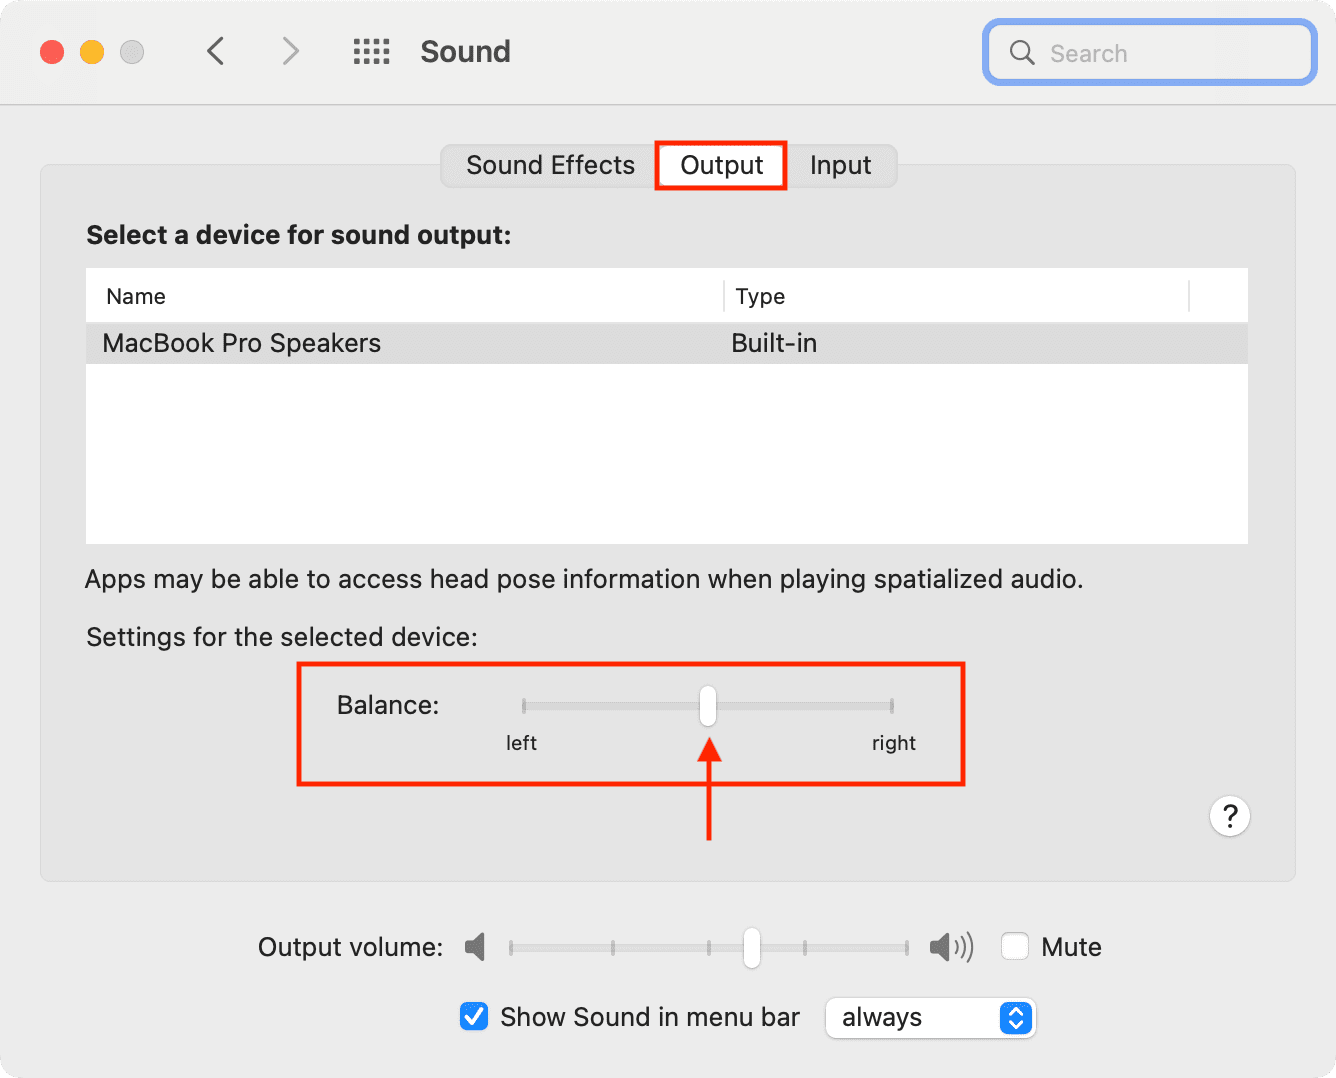 Set the perfect sound output balance for left and right AirPod on Mac